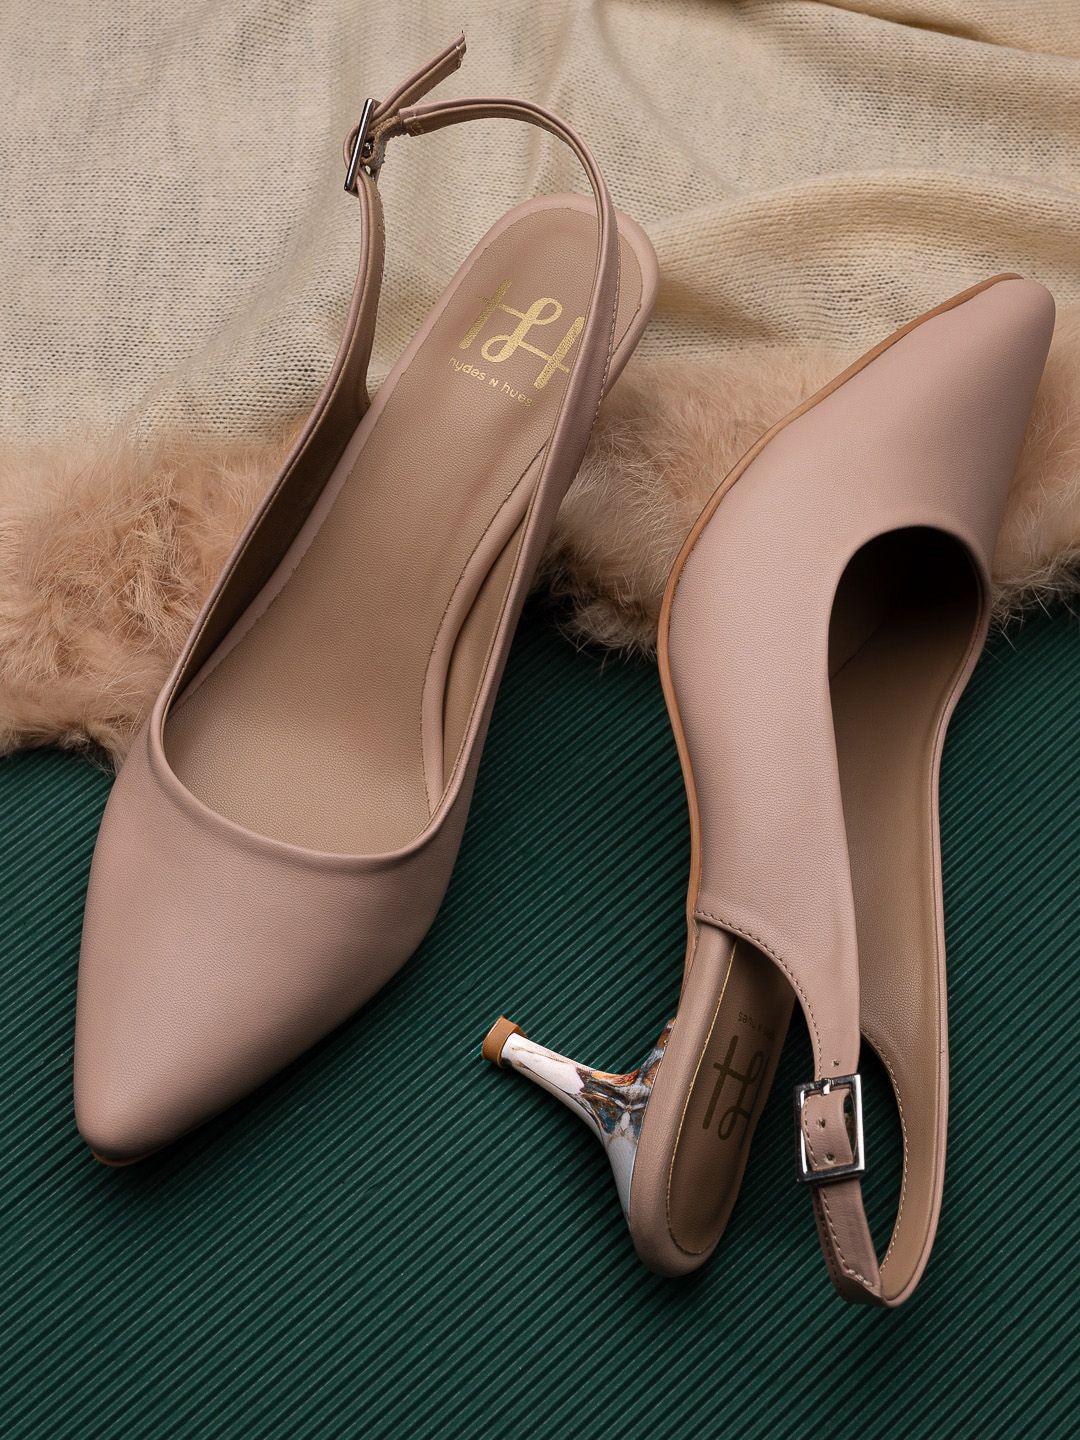 hydes n hues pointed toe kitten mules with buckles